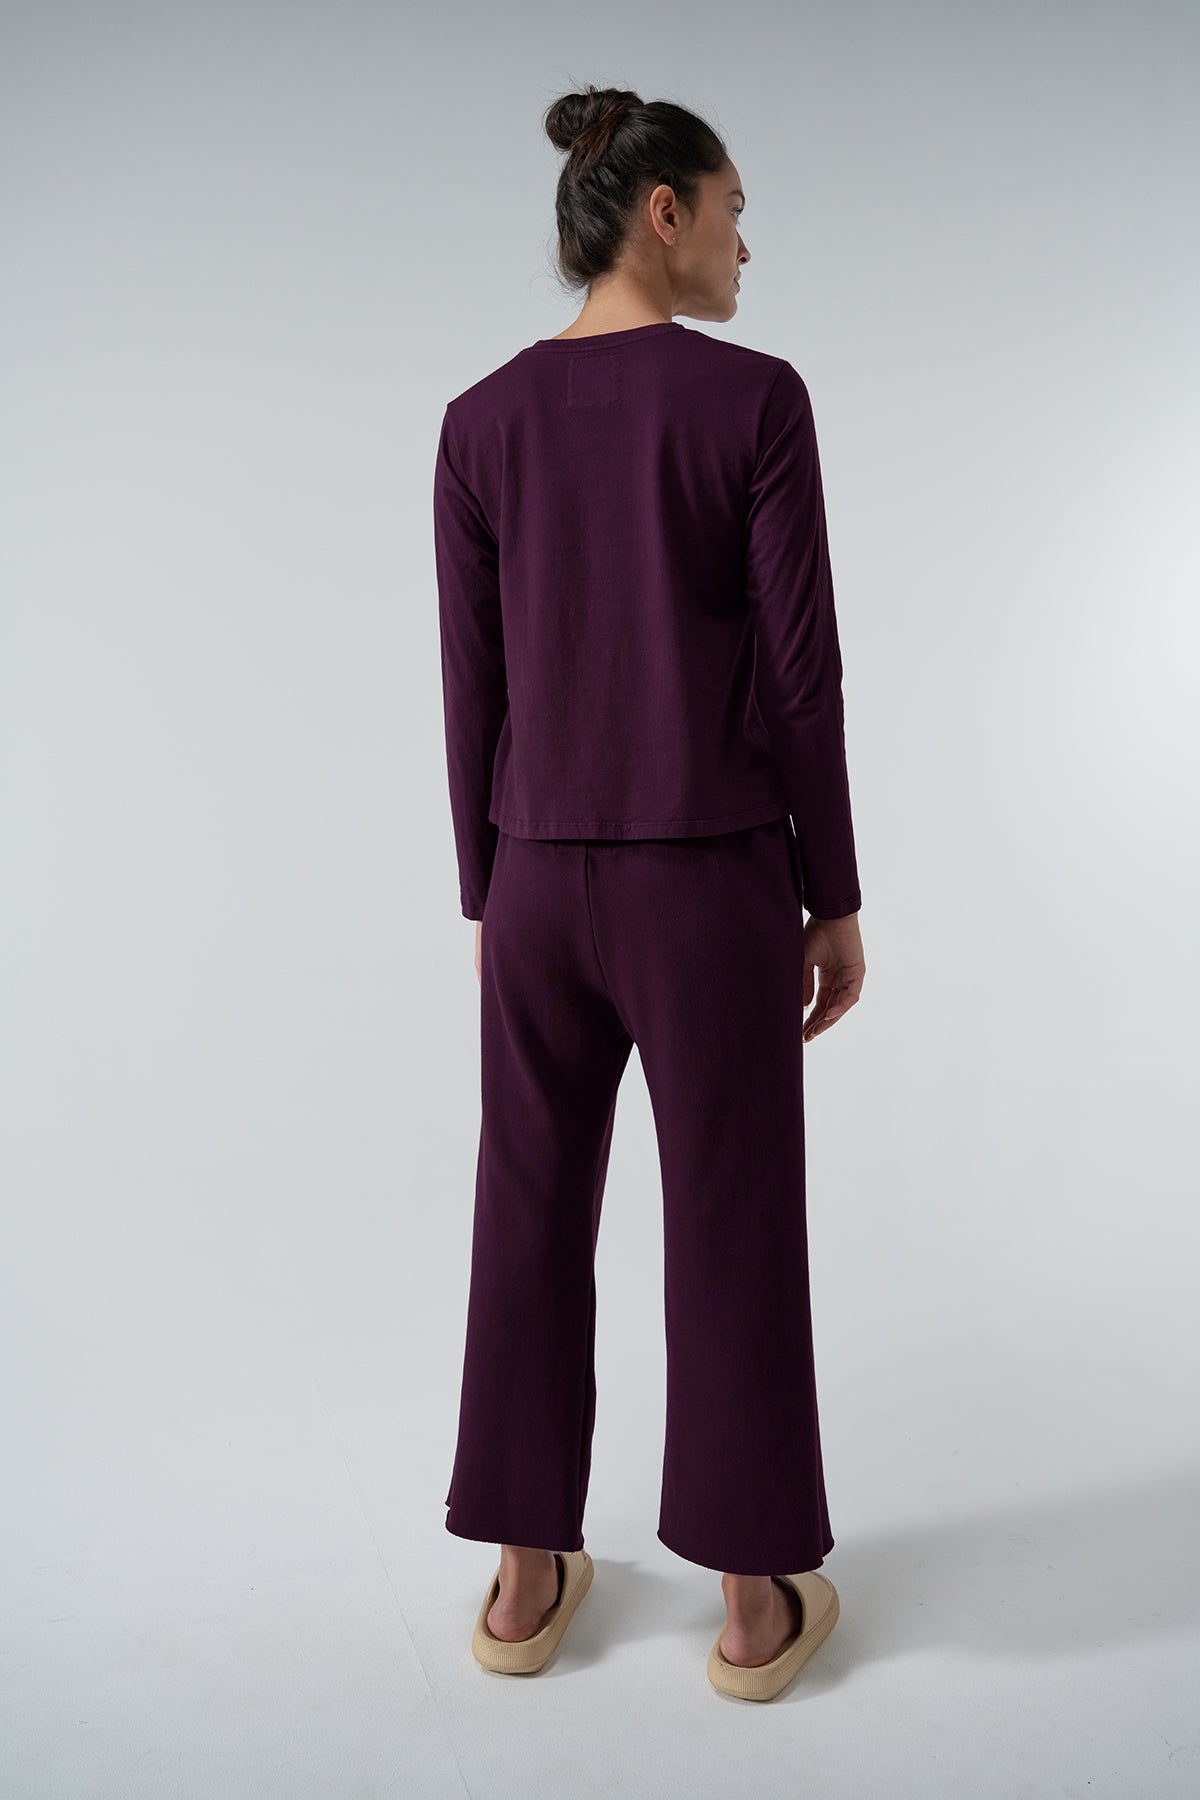 Vicente Tee Mulberry with Montecito Sweatpant Mulberry Back -24063841501377